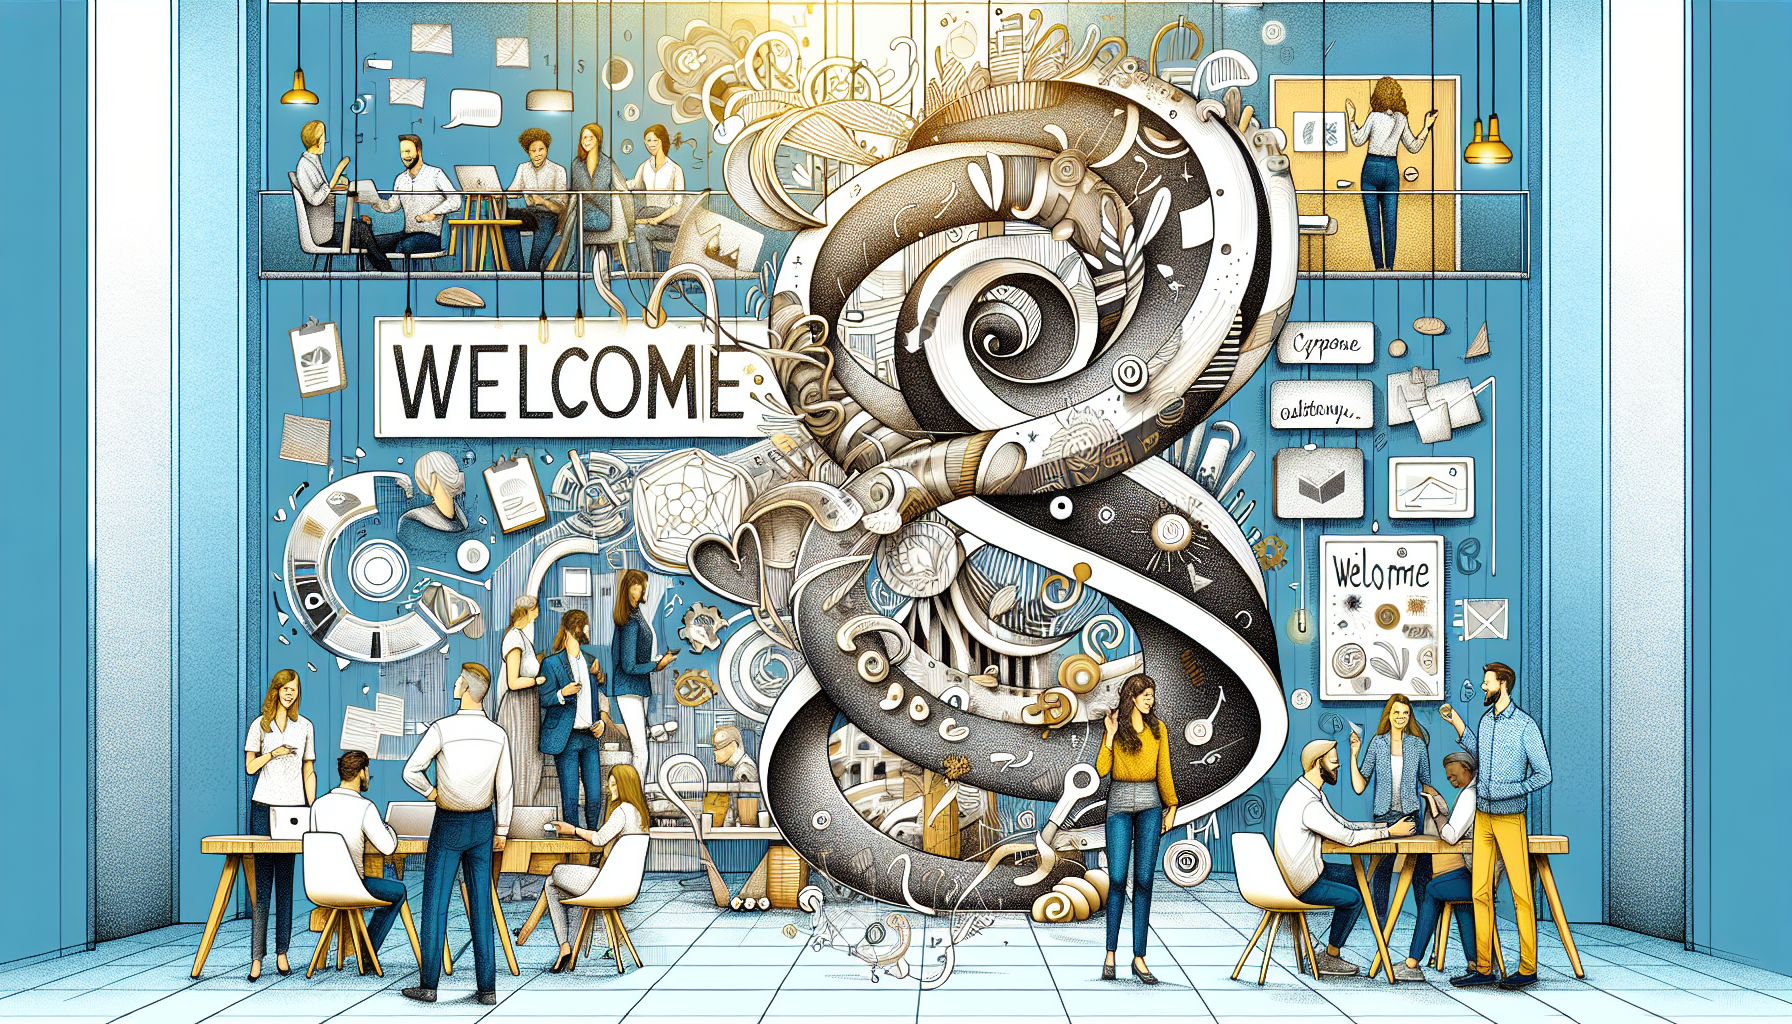 Illustration of a warm and engaging welcome message